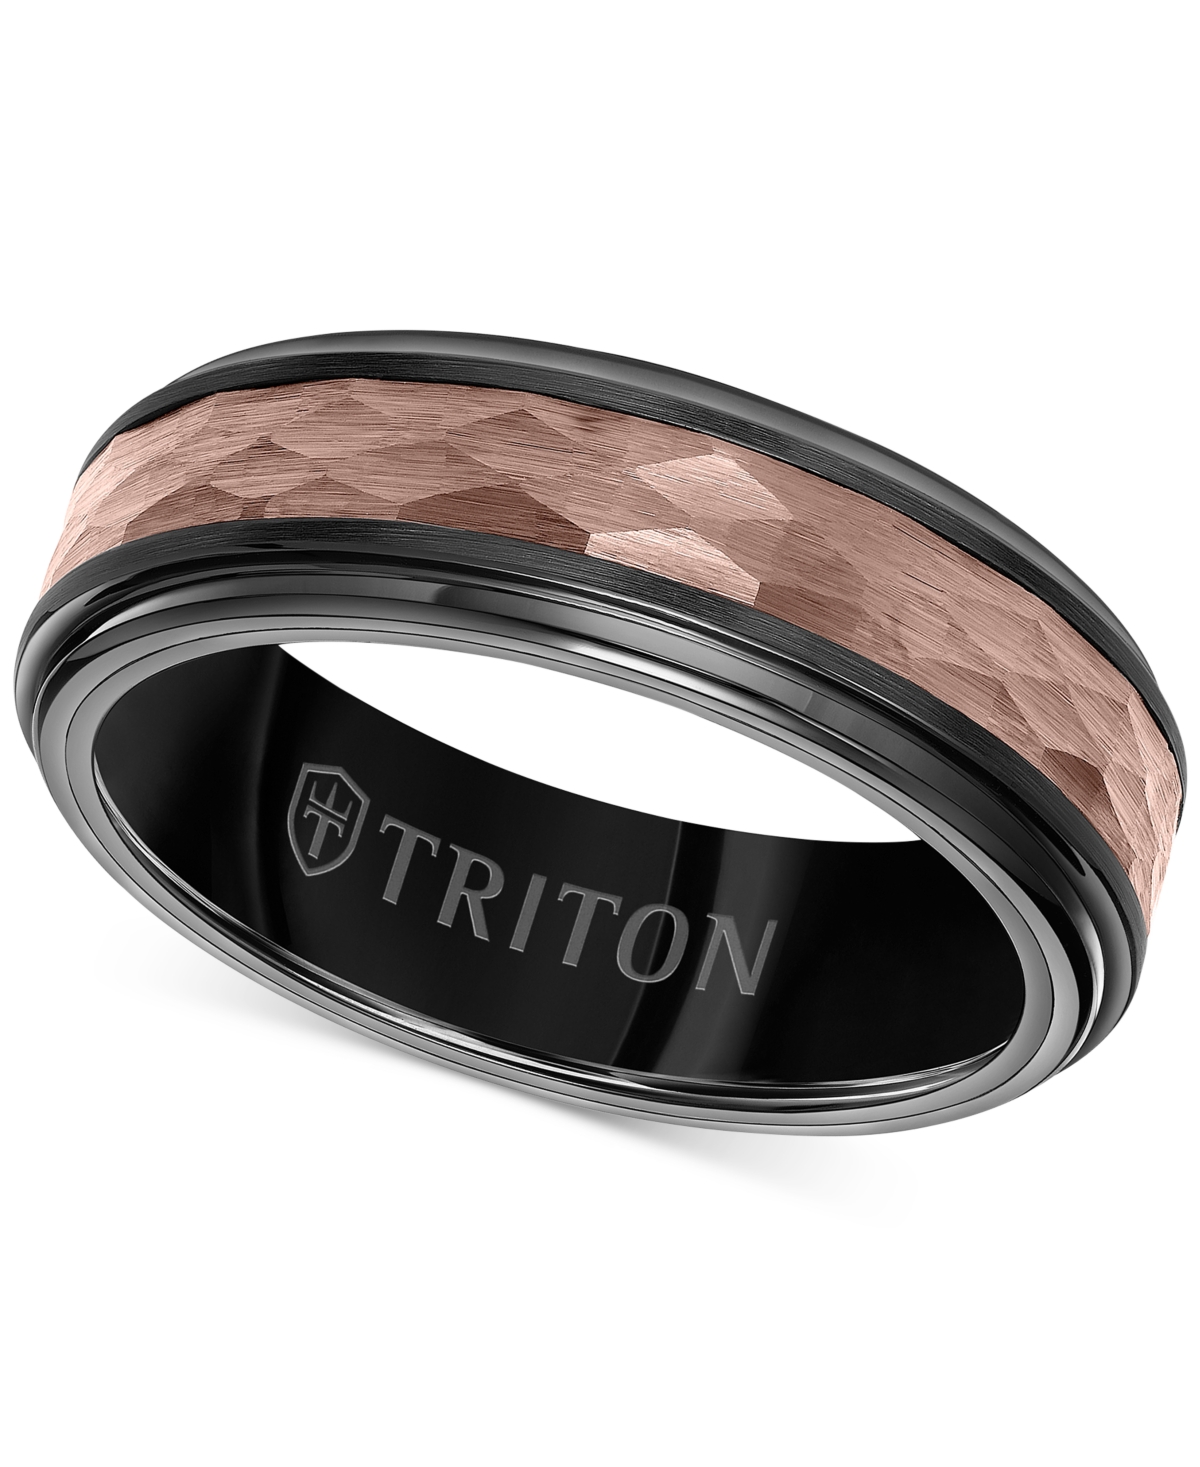 Triton Men's Stainless Steel Ring, Smooth Comfort Fit Wedding Band - Macy's